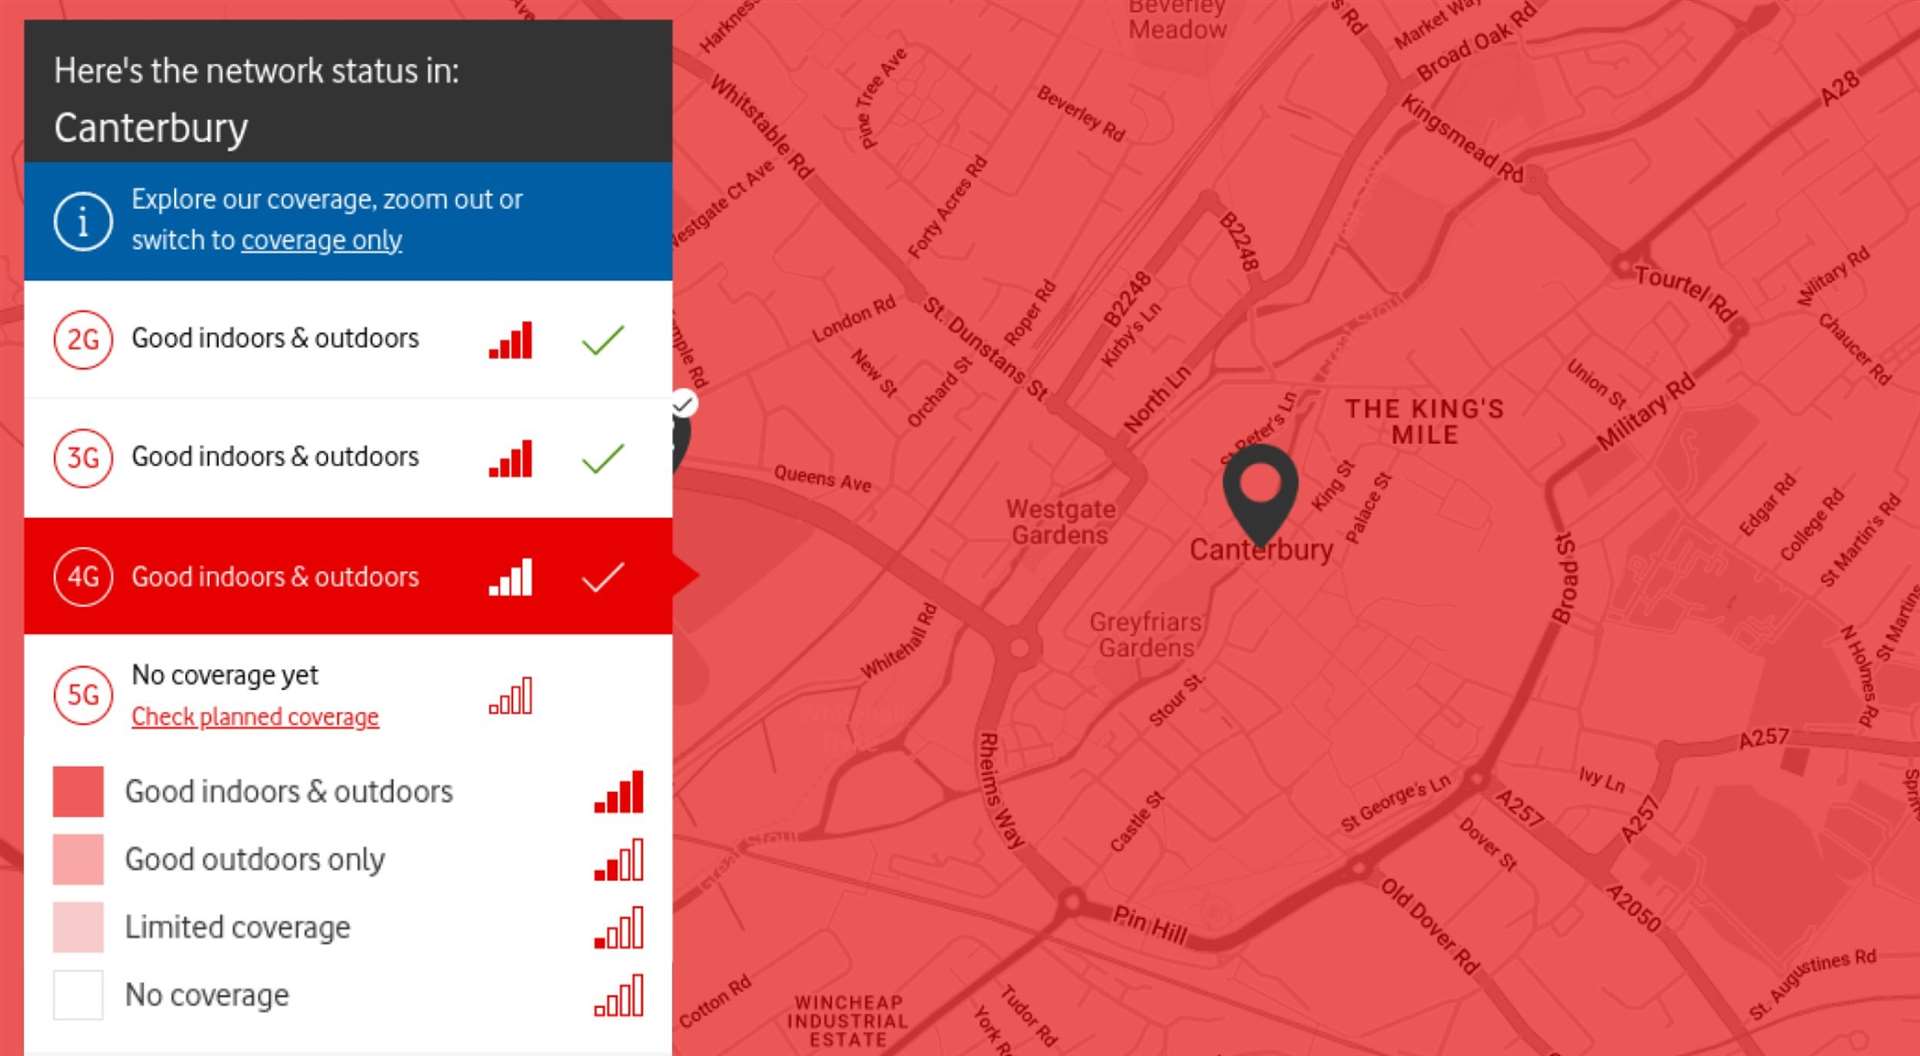 Vodafone claimed its signal map shows Canterbury city centre as having complete 4G coverage, but later conceded the map is a “guide” and it “cannot guarantee actual signal coverage”